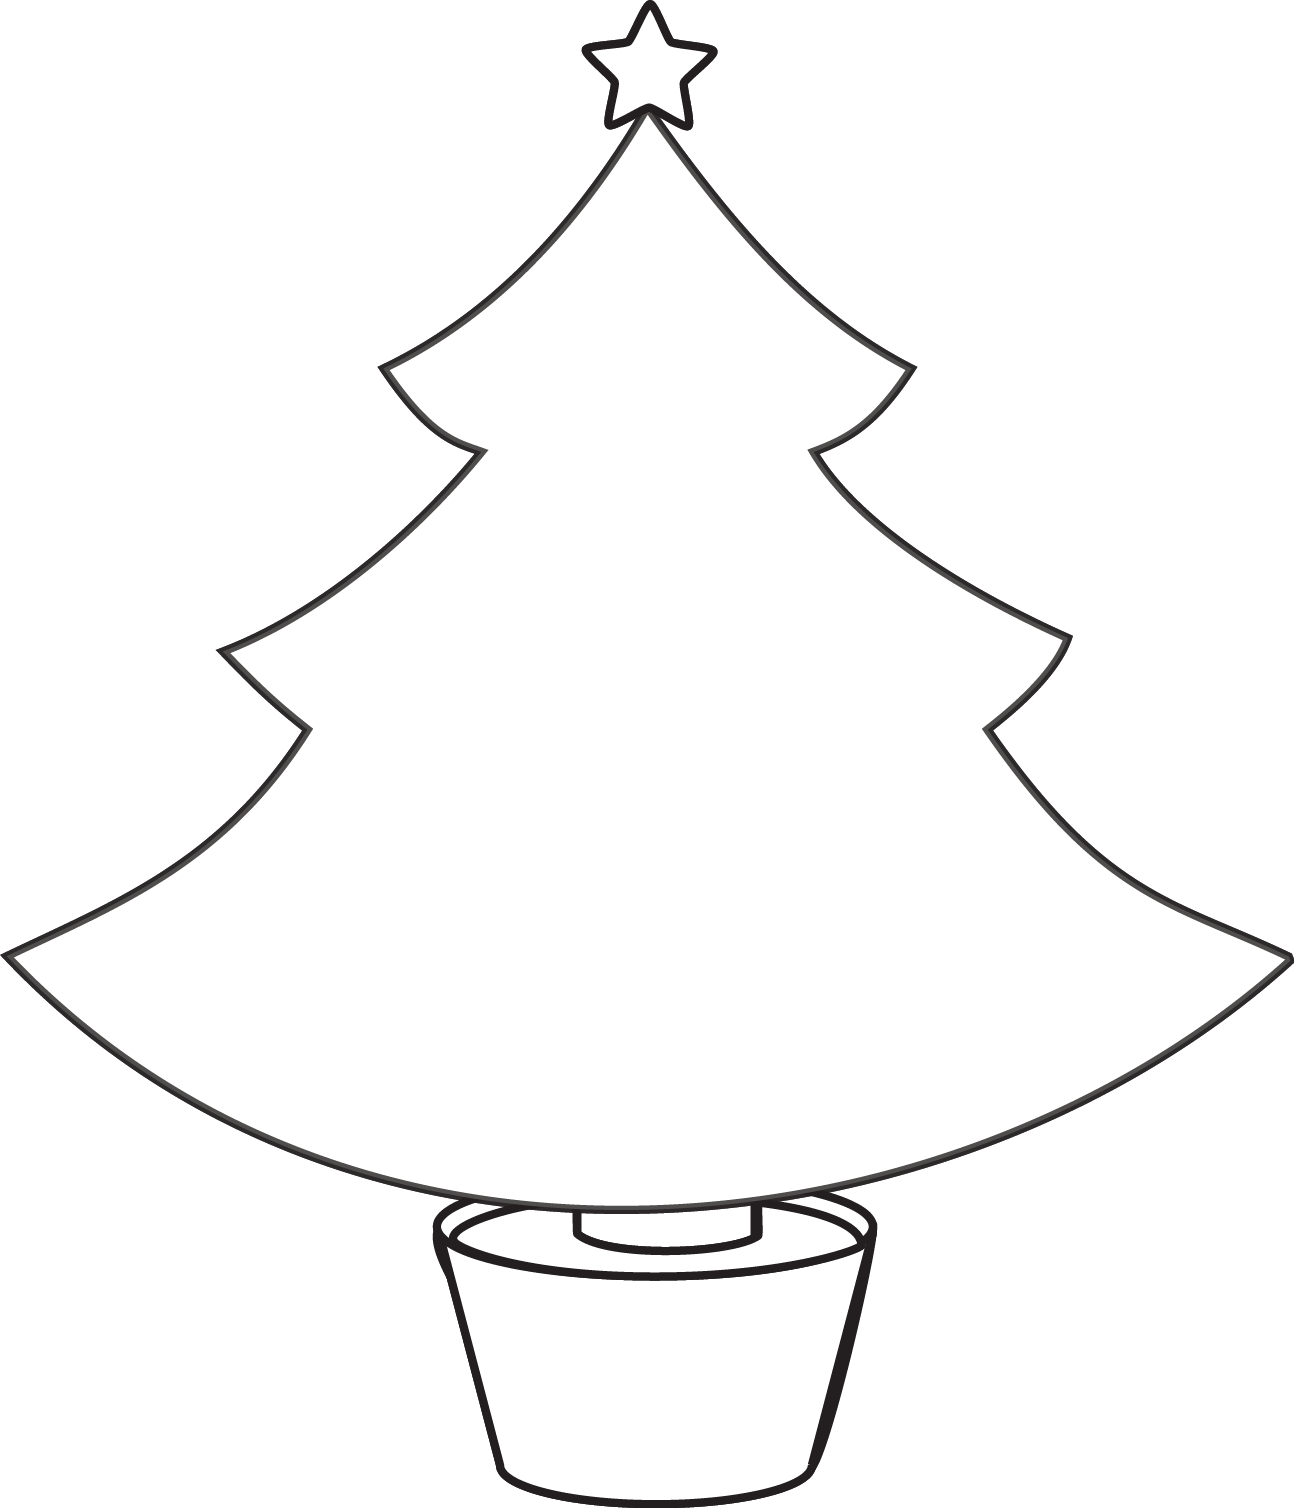 Christmas Tree Outline Clip Art Cliparts.co